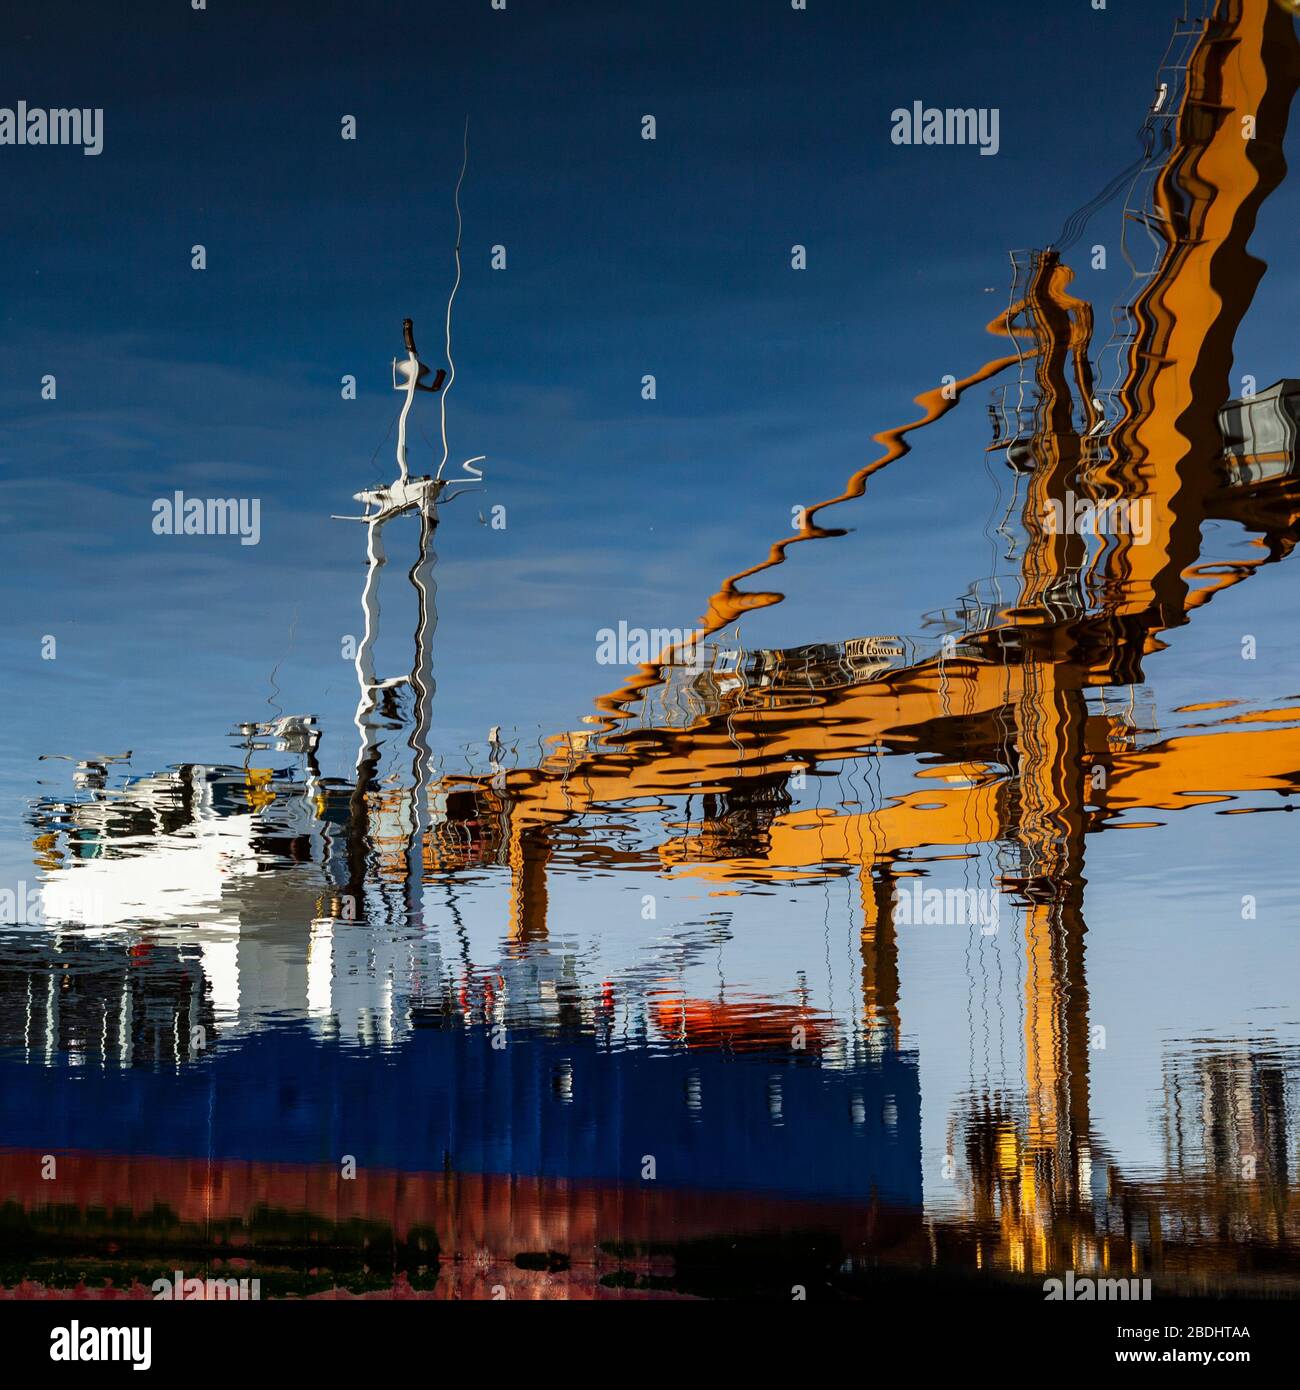 Ship and crane refection in still water. Stock Photo